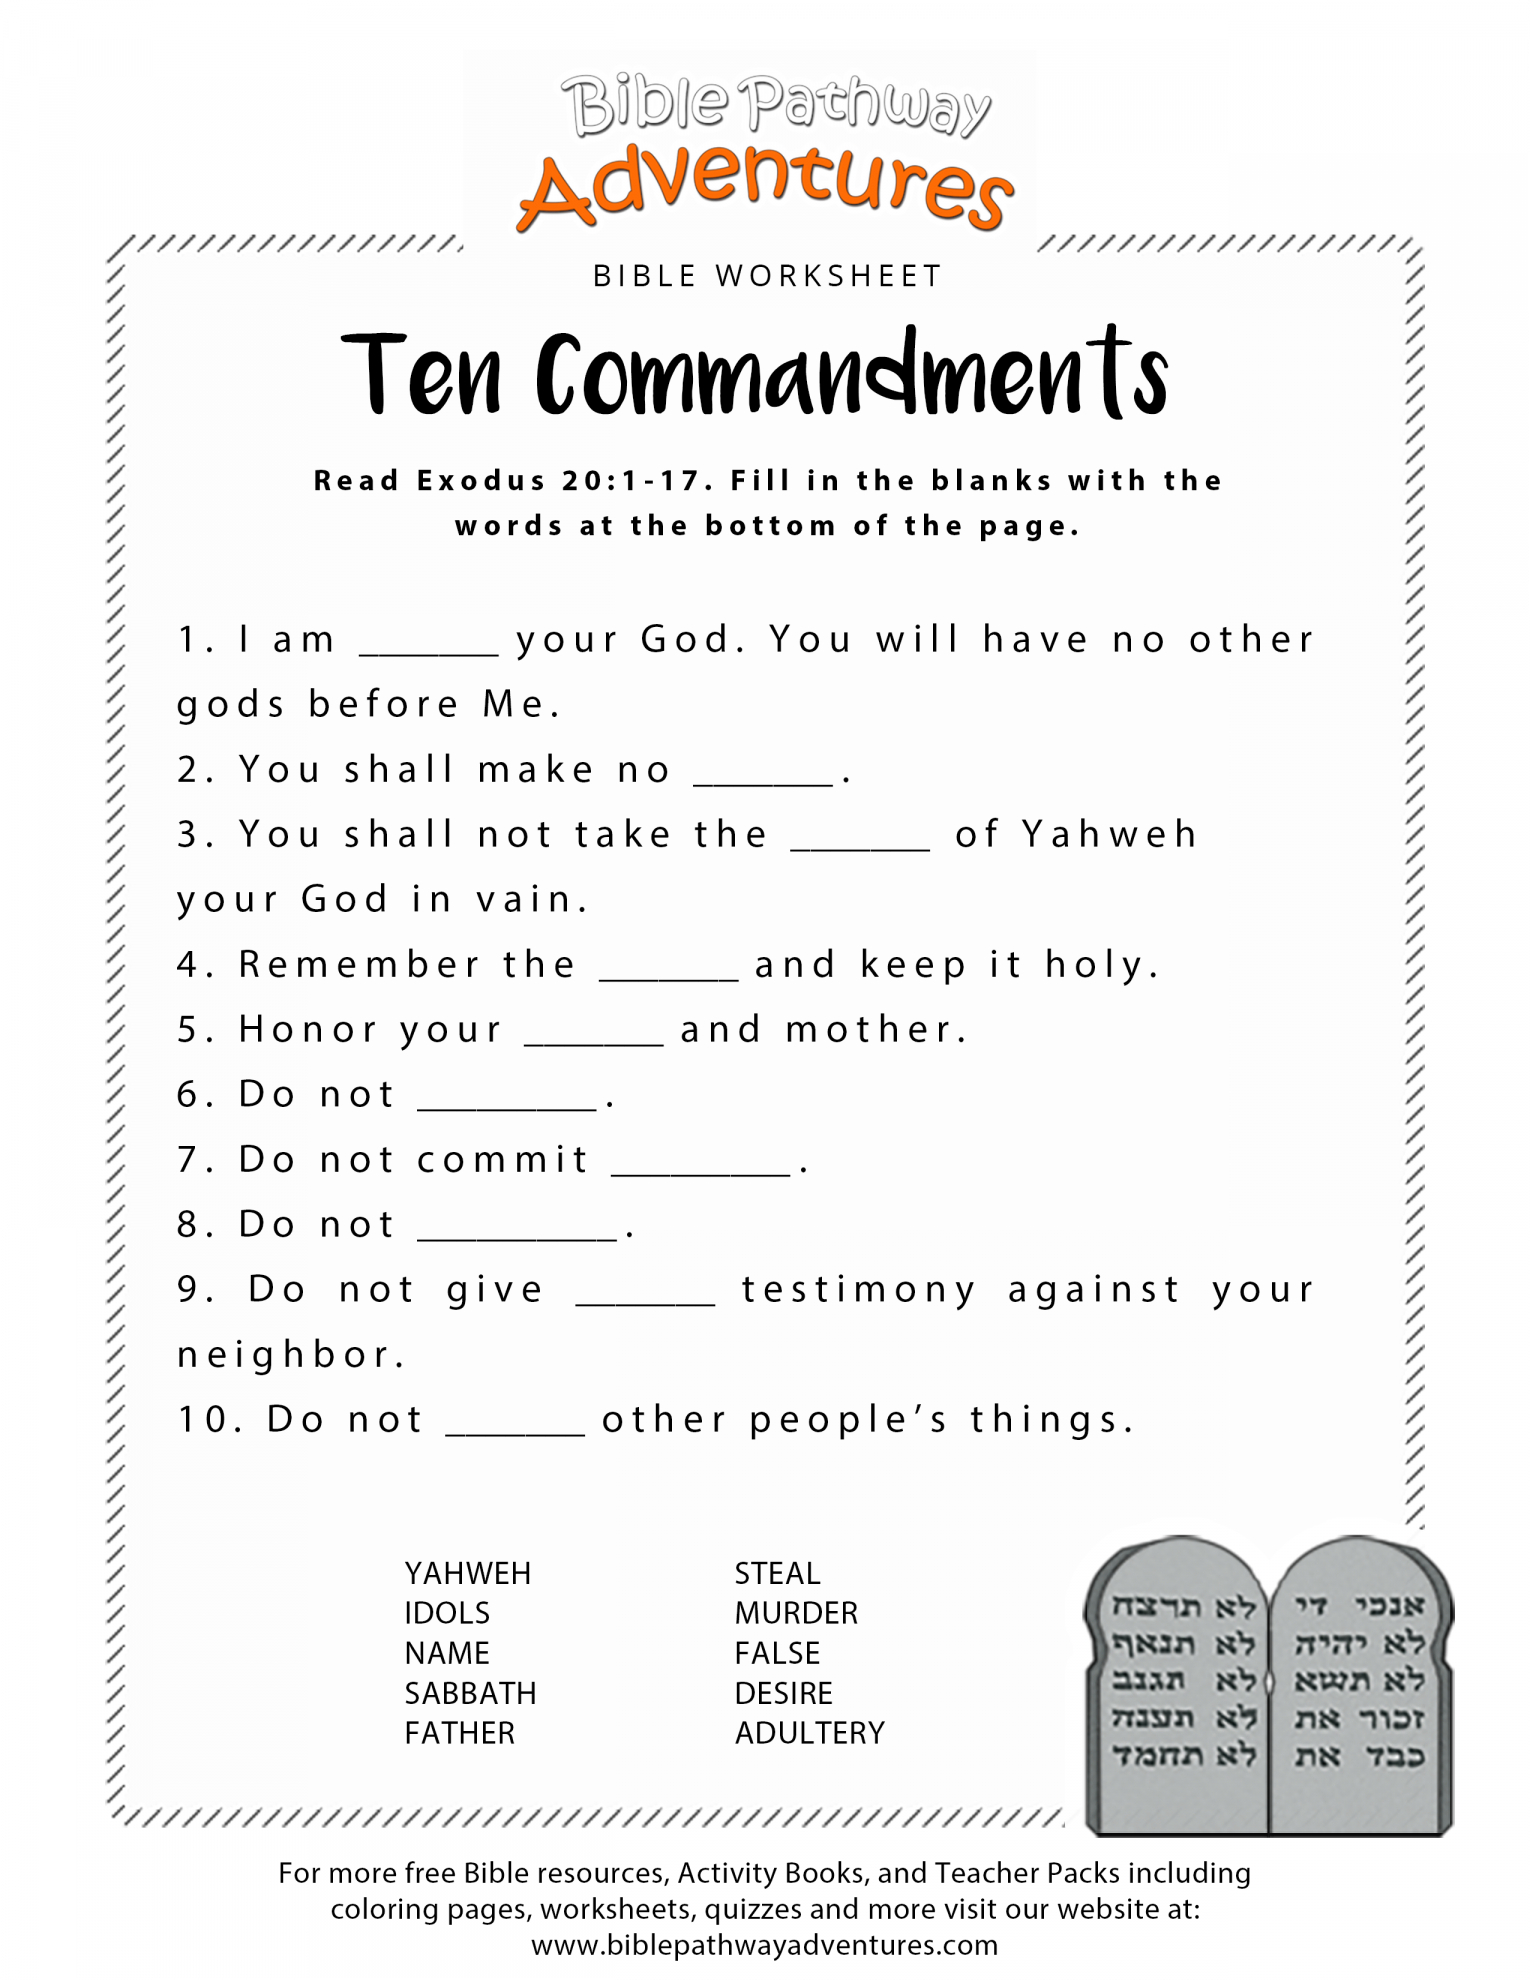 Free Printable Bible Worksheets For Youth ~ Papersnake.ca - Free Printable Bible Lessons For Youth